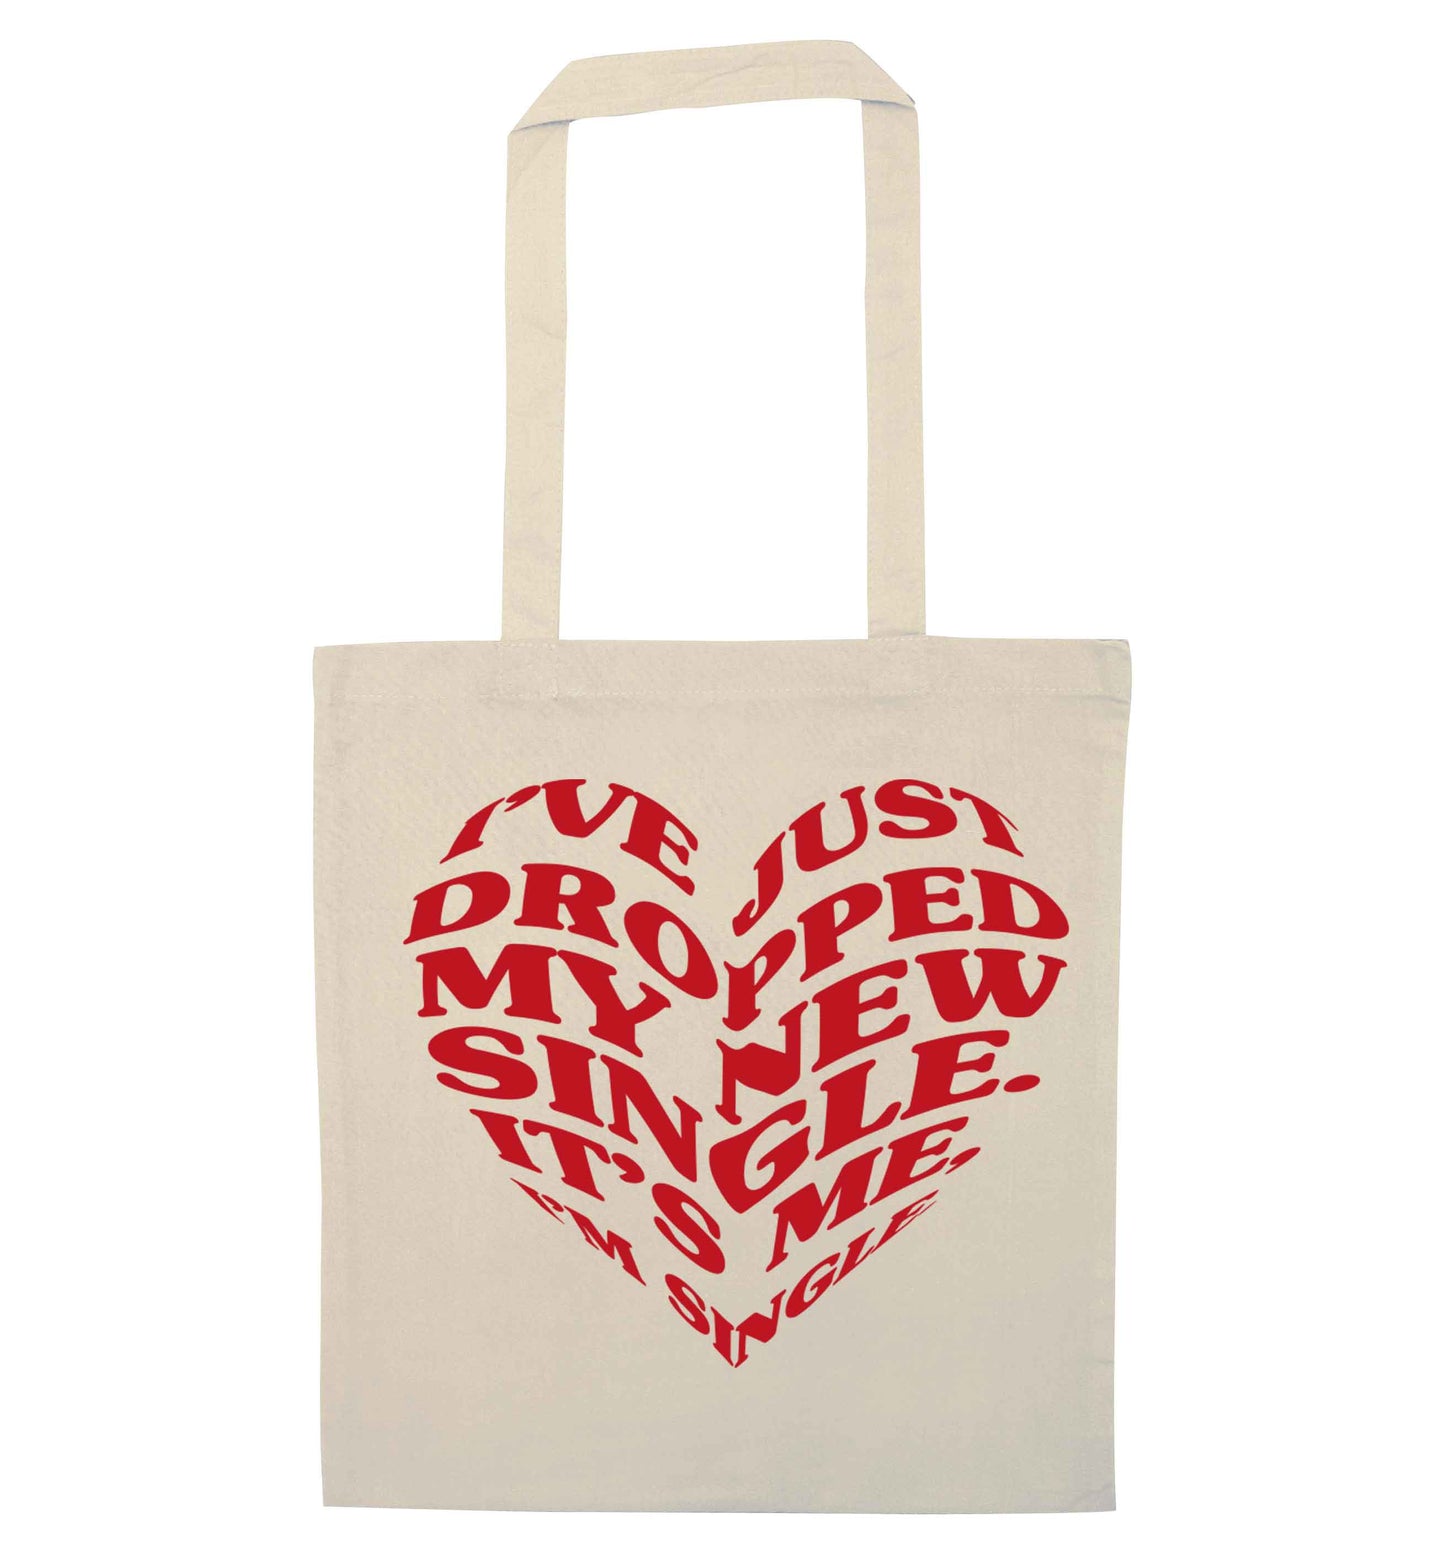 I've just dropped my new single it's me I'm single natural tote bag